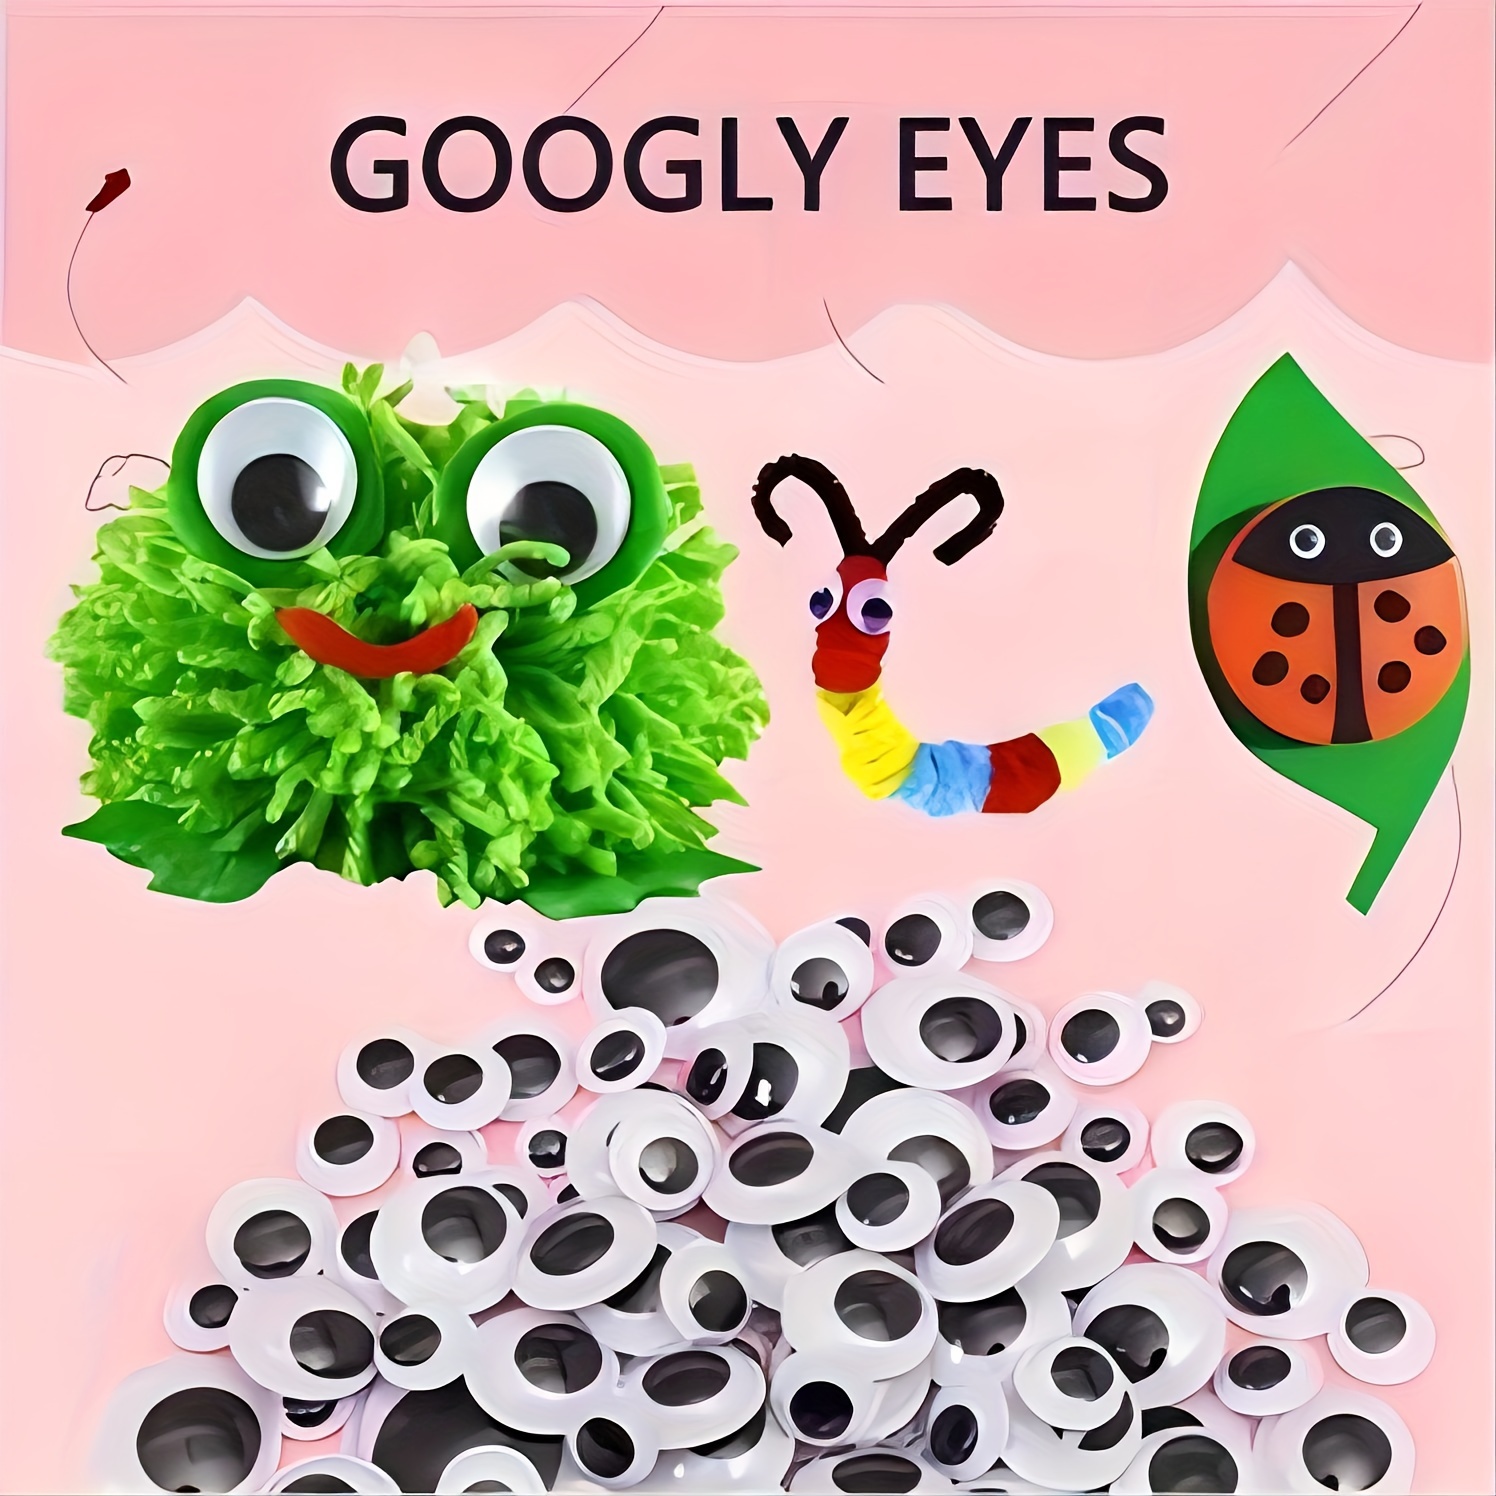 Googly Wiggly Wobbly Craft Eyes Self Adhesive Stickers 7 Sizes 4mm to 12mm